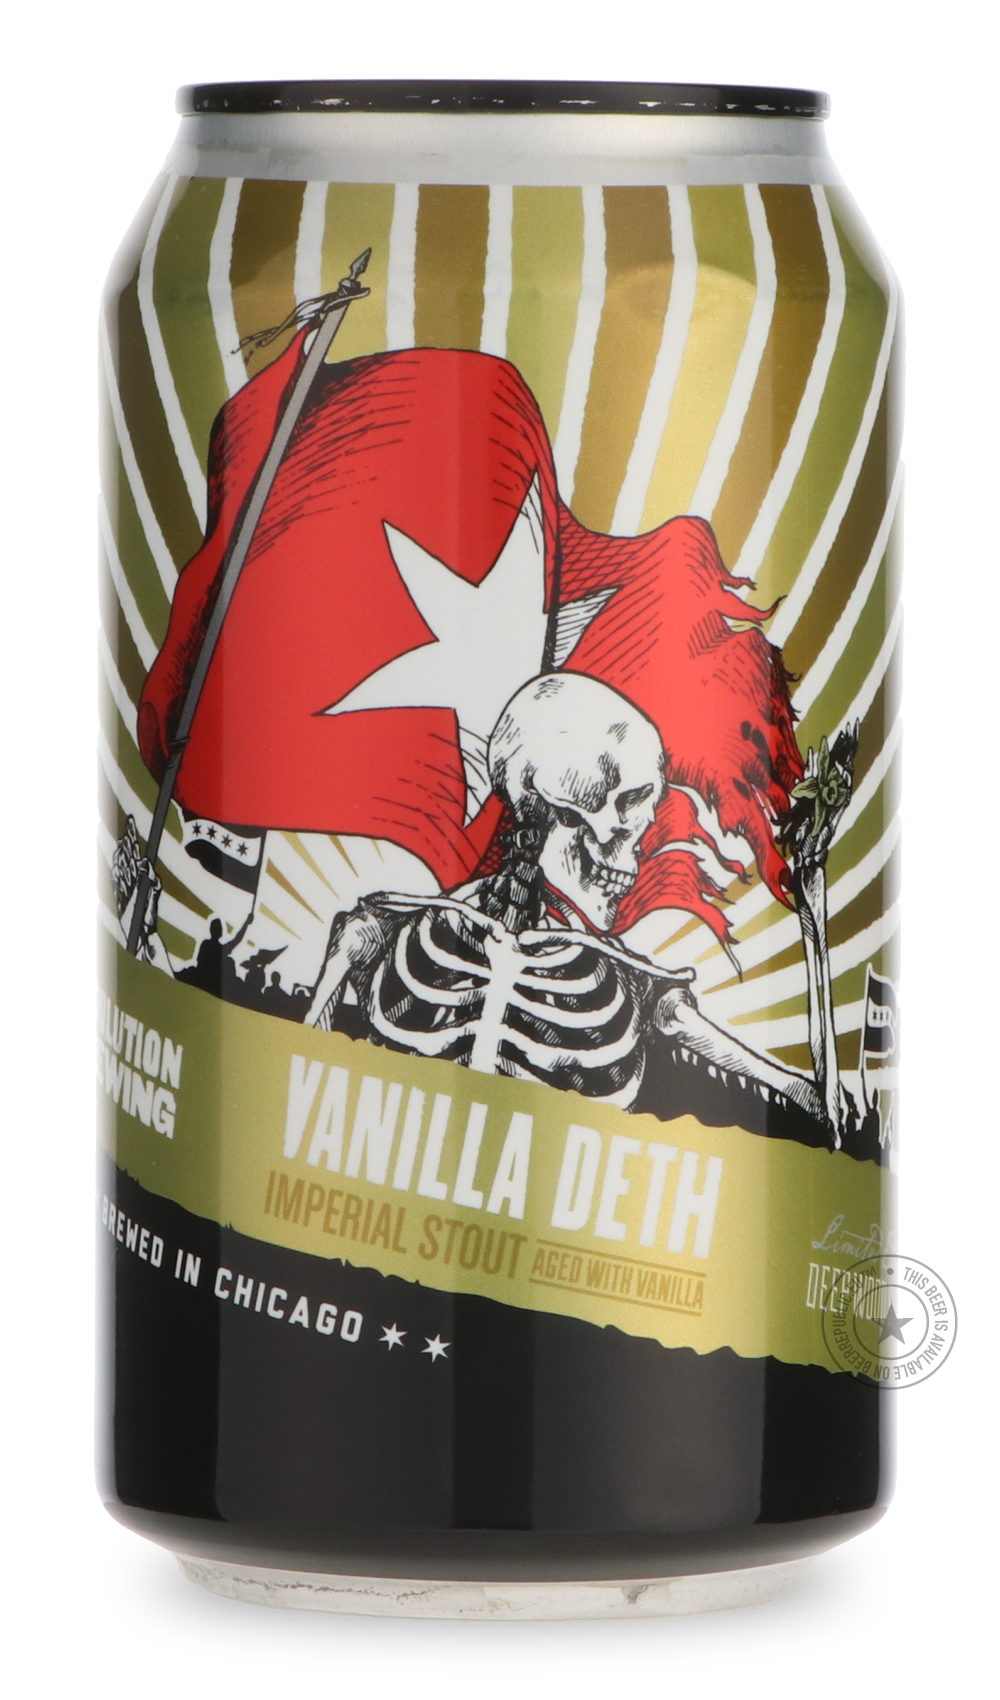 -Revolution- Vanilla Deth (2021)-Stout & Porter- Only @ Beer Republic - The best online beer store for American & Canadian craft beer - Buy beer online from the USA and Canada - Bier online kopen - Amerikaans bier kopen - Craft beer store - Craft beer kopen - Amerikanisch bier kaufen - Bier online kaufen - Acheter biere online - IPA - Stout - Porter - New England IPA - Hazy IPA - Imperial Stout - Barrel Aged - Barrel Aged Imperial Stout - Brown - Dark beer - Blond - Blonde - Pilsner - Lager - Wheat - Weizen